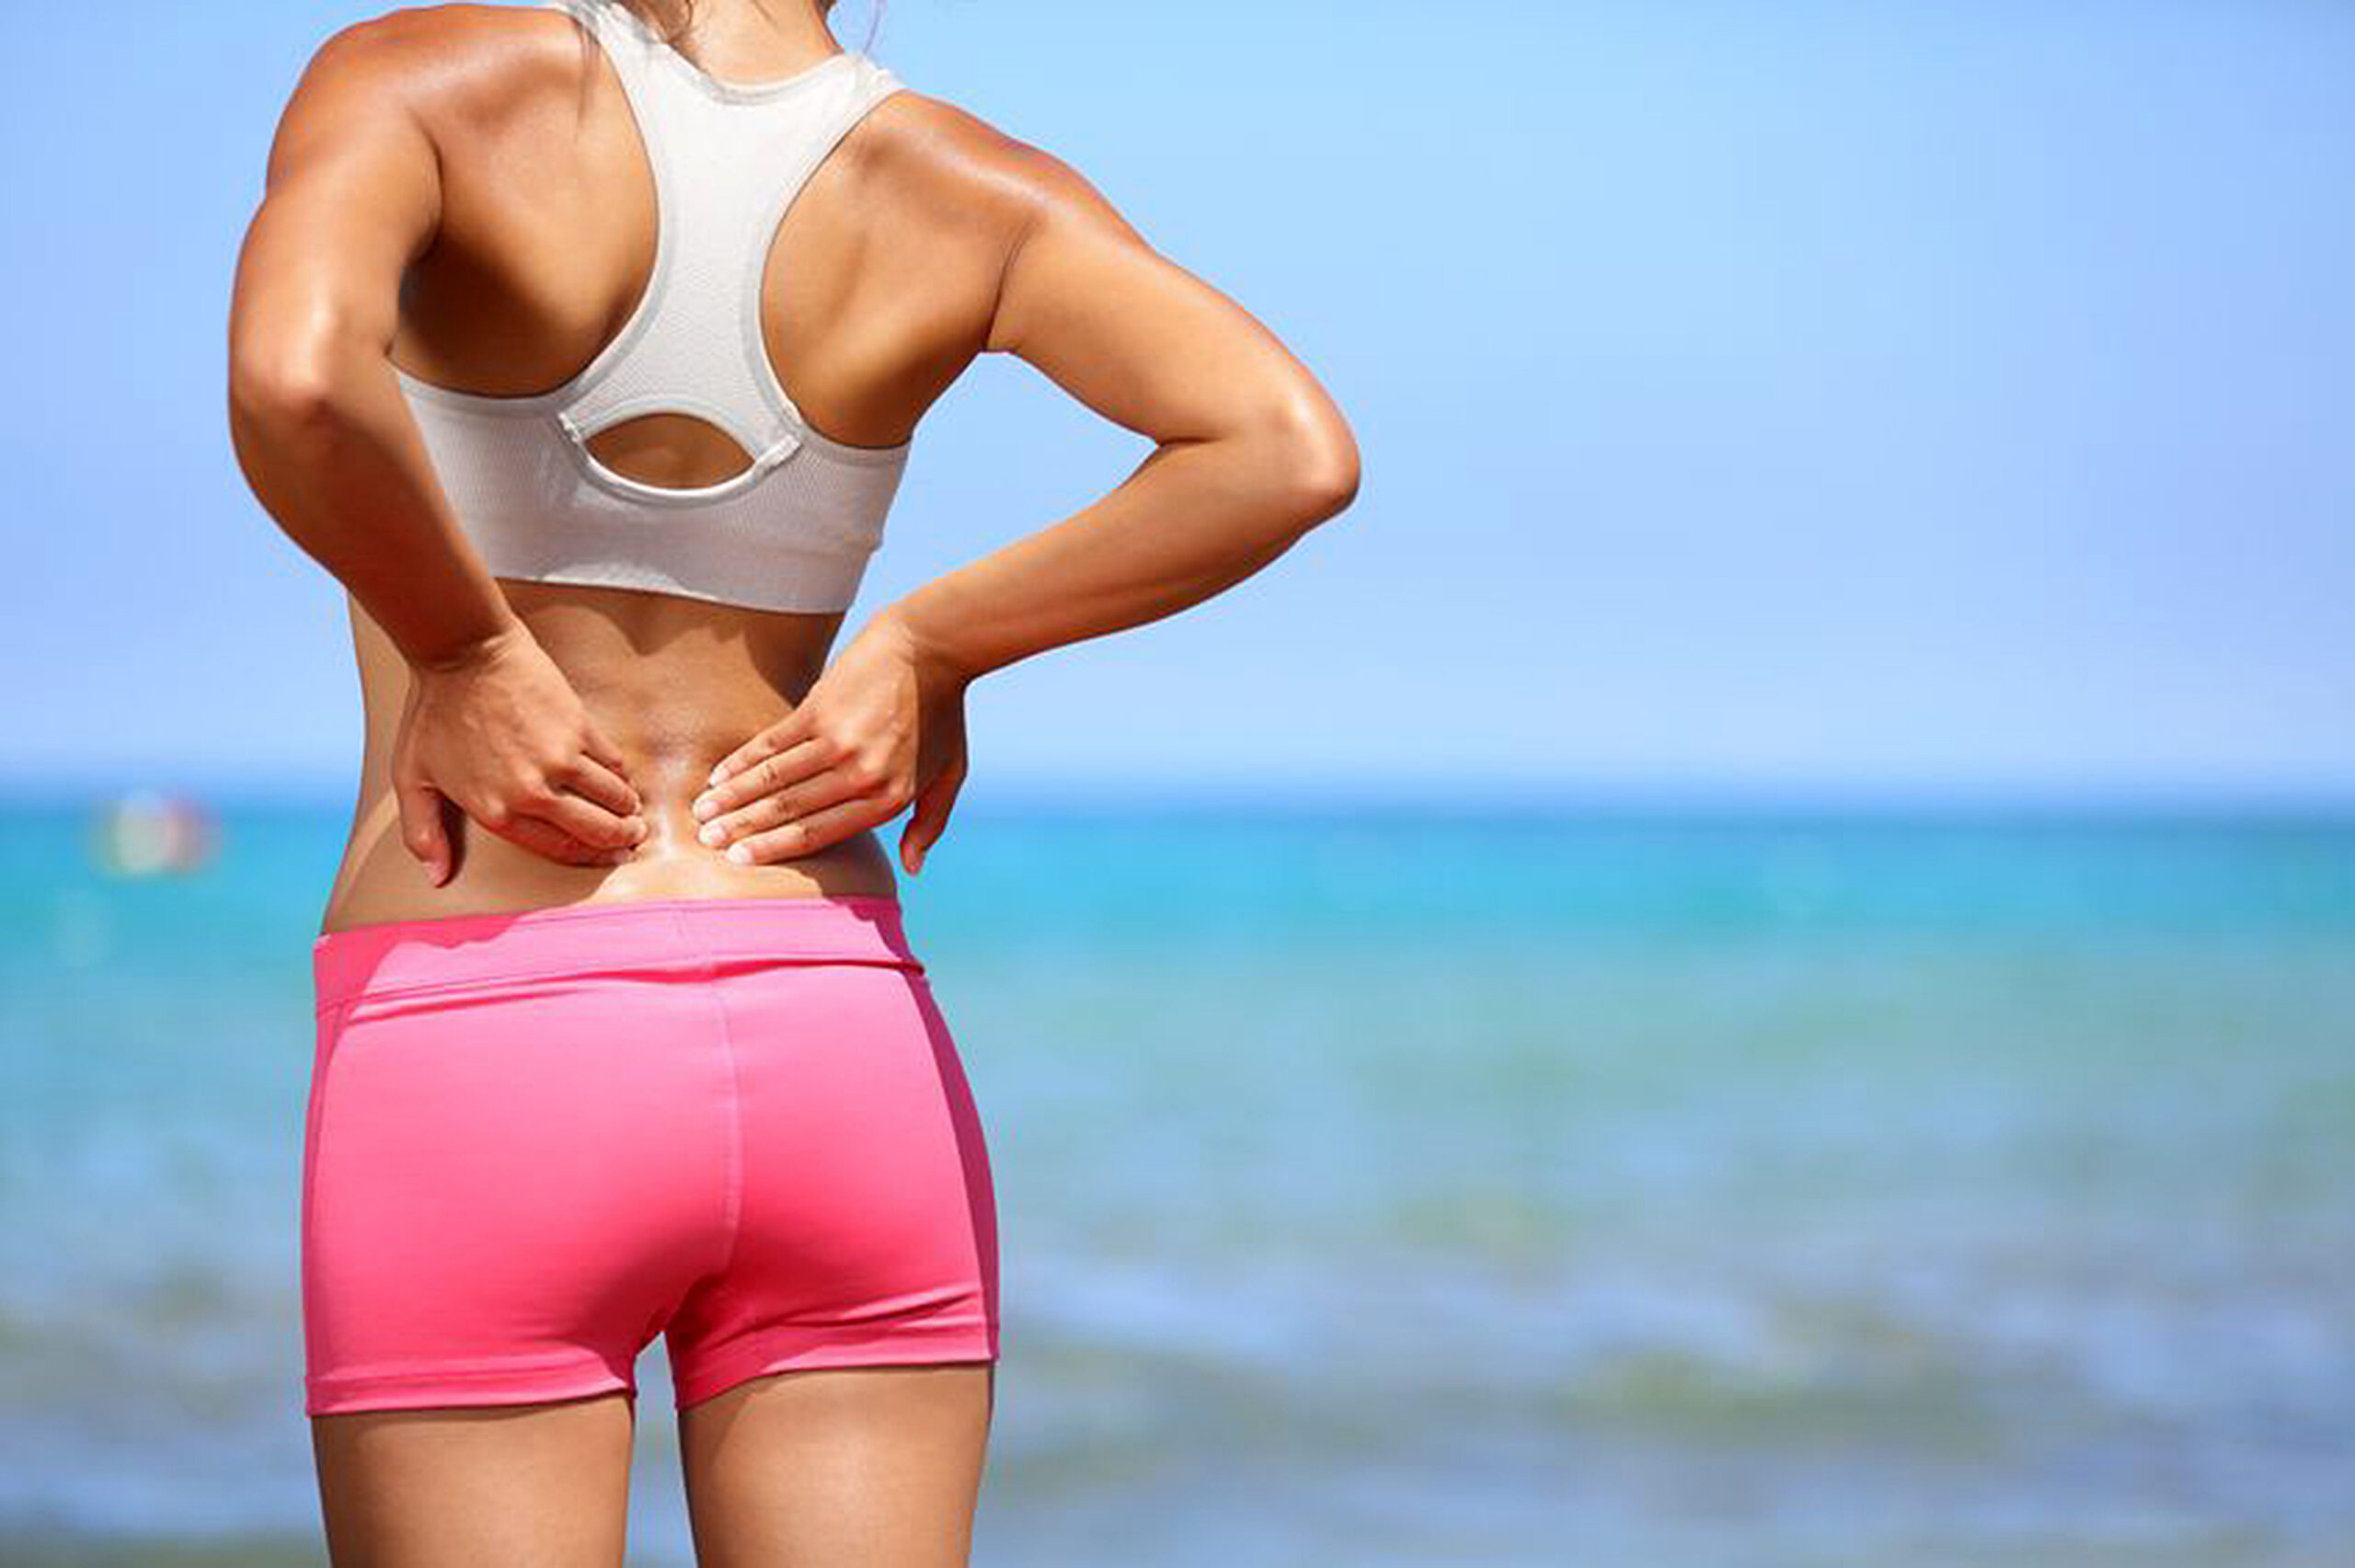 20996111 - back pain. athletic woman in pink sportswear standing at the seaside rubbing the muscles of her lower back, cropped torso portrait.